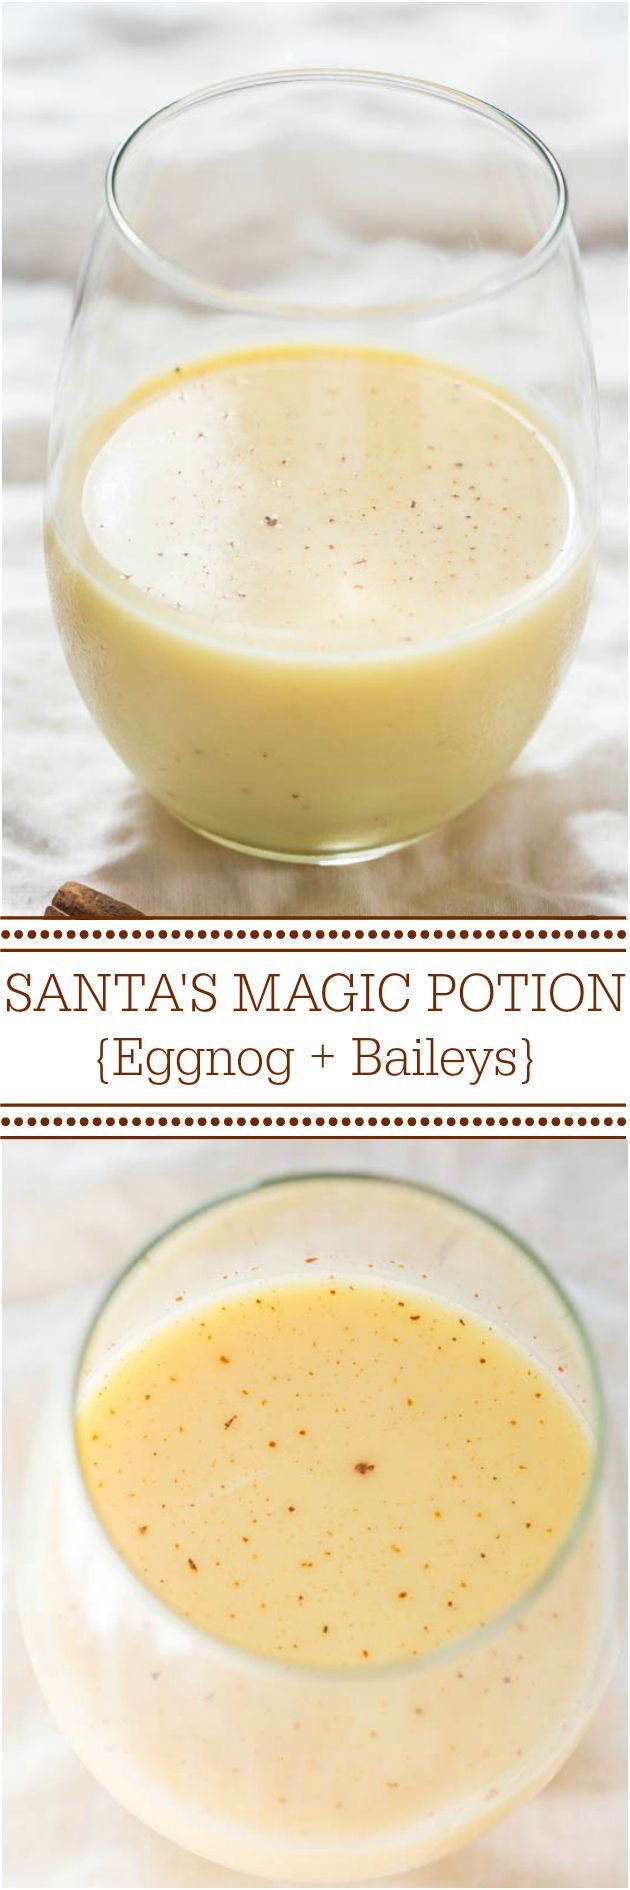 Santas Magic Potion {Eggnog and Baileys} – Have eggnog to use? This drink is smooth, creamy, and puts your nog to great use! Mmm!